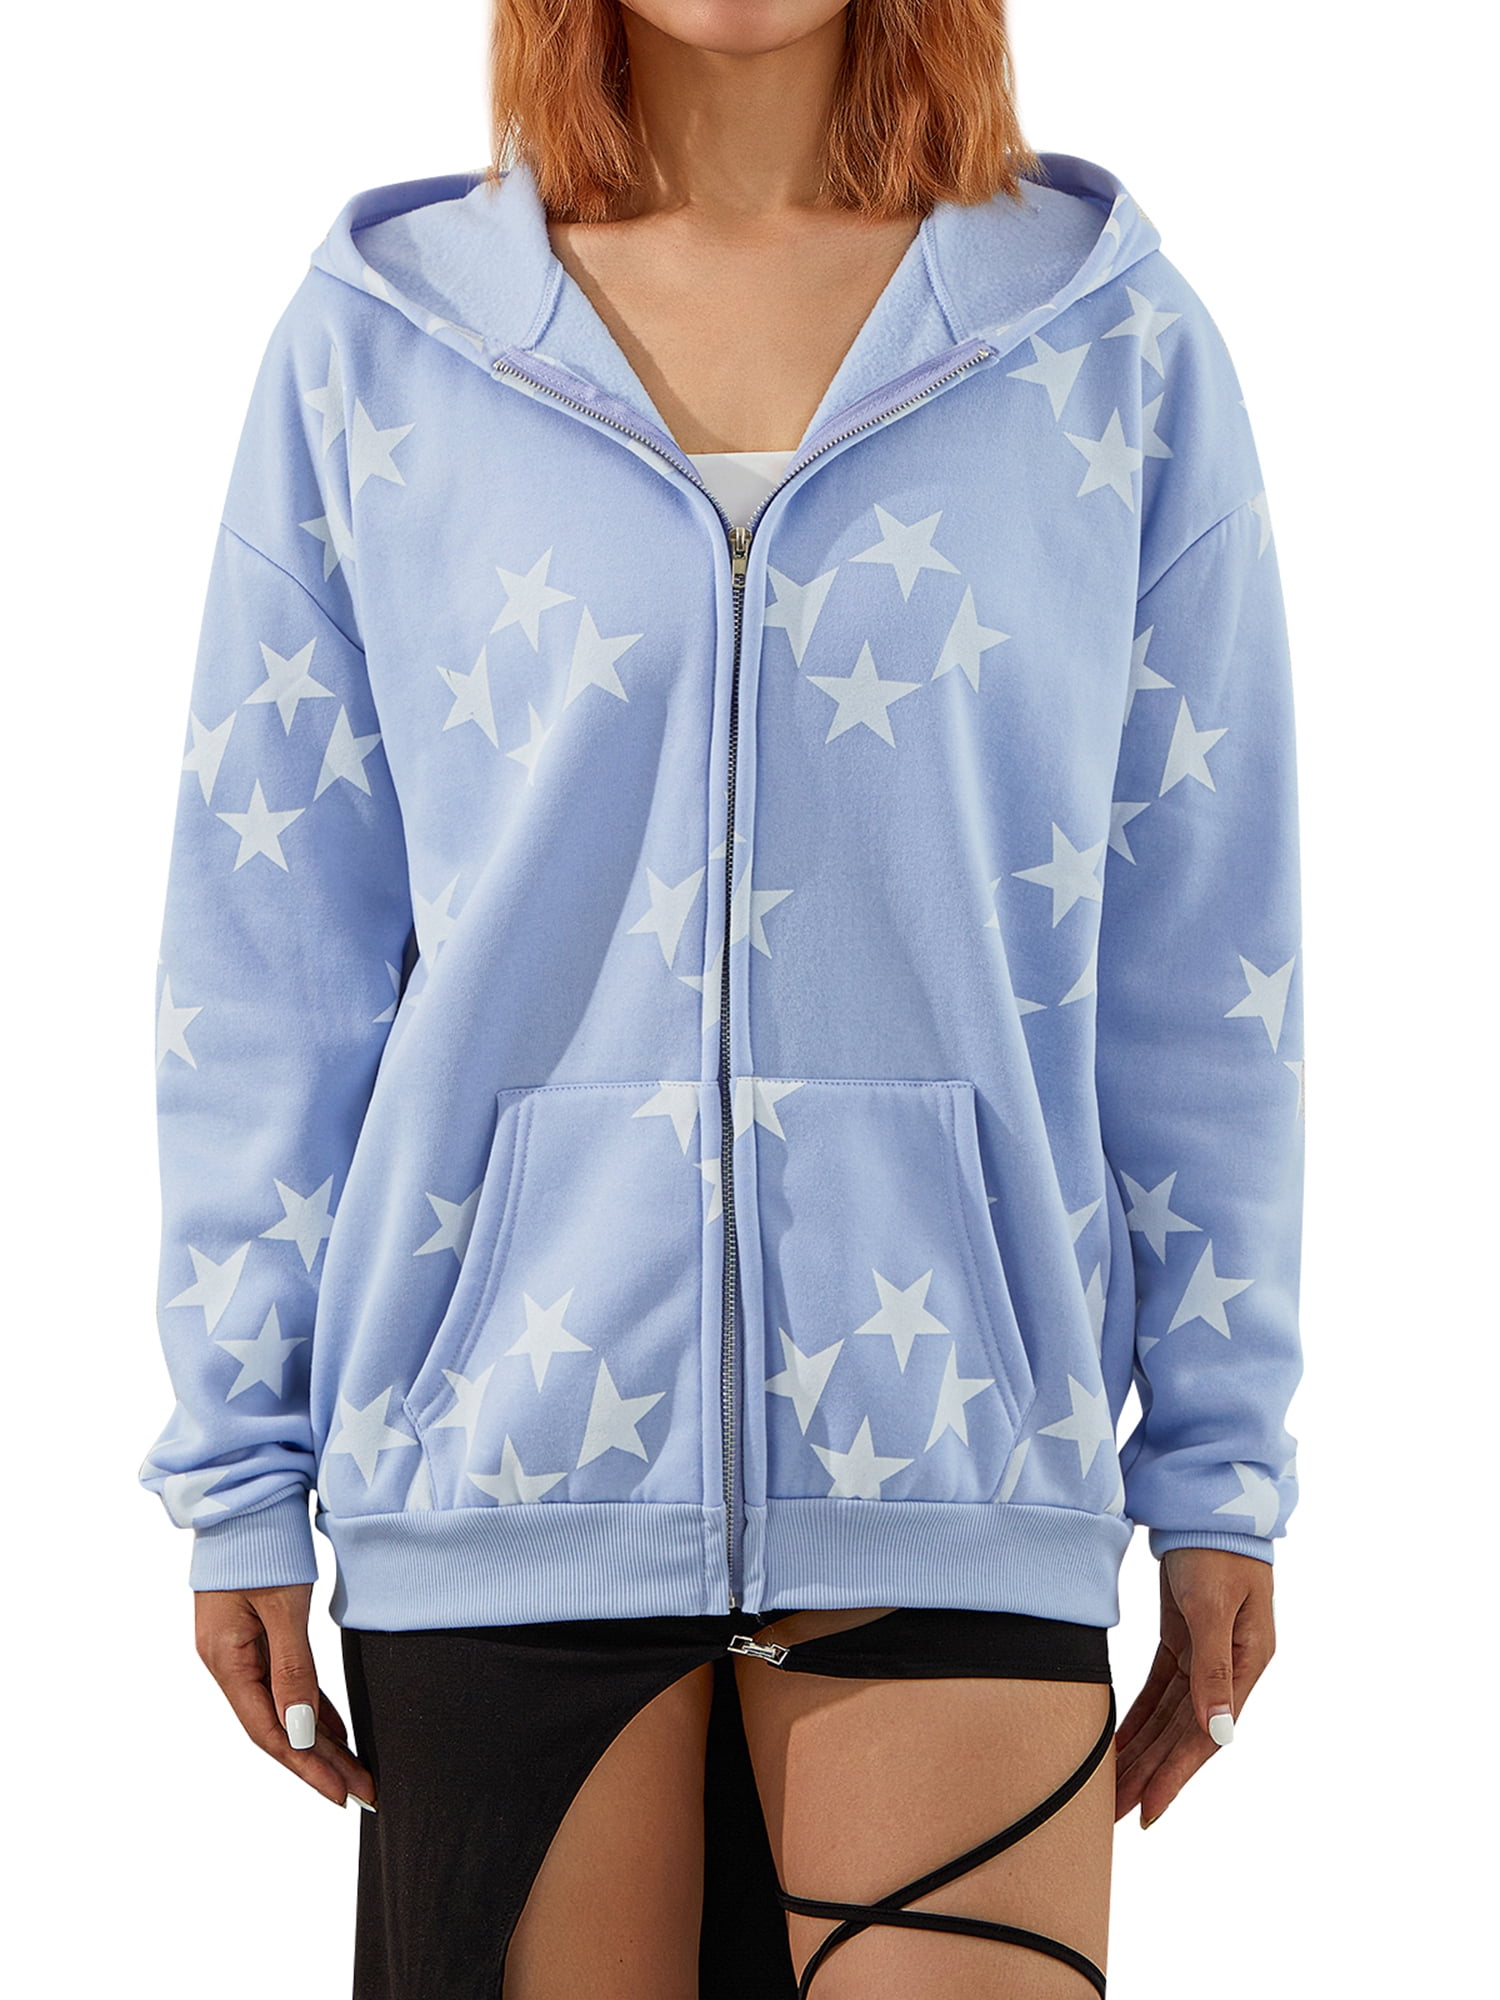 Exclusive Boys Blue Abstract Print Pull-Over Hoodie (21819) -  Brandspopper.com